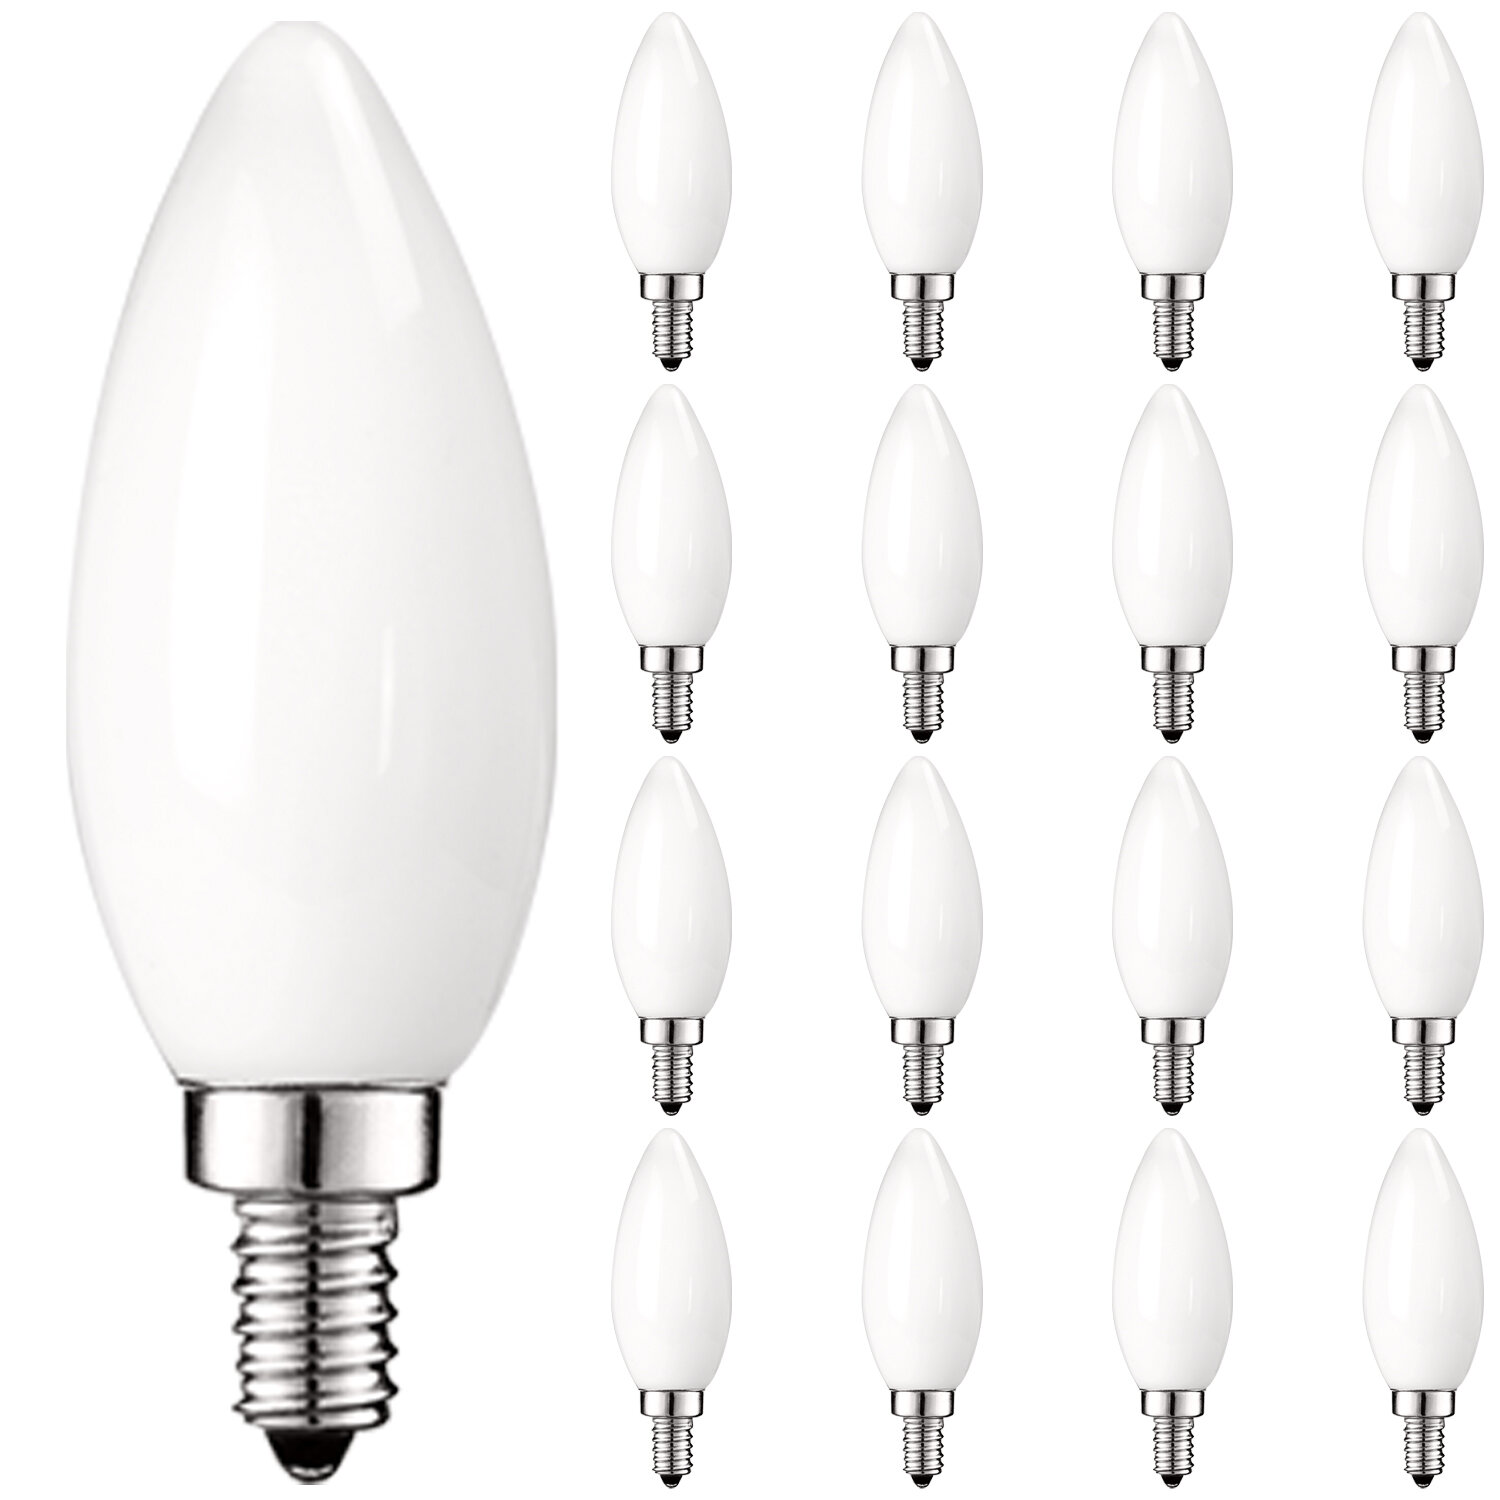 Wet Rated 6-Pack 300 Lumens E12 Base Enclosed Fixture Rated 2700K Soft White MaxLite Candelabra LED Chandelier Bulbs Energy Star 40W Equivalent Dimmable Filament Candle Bulbs 